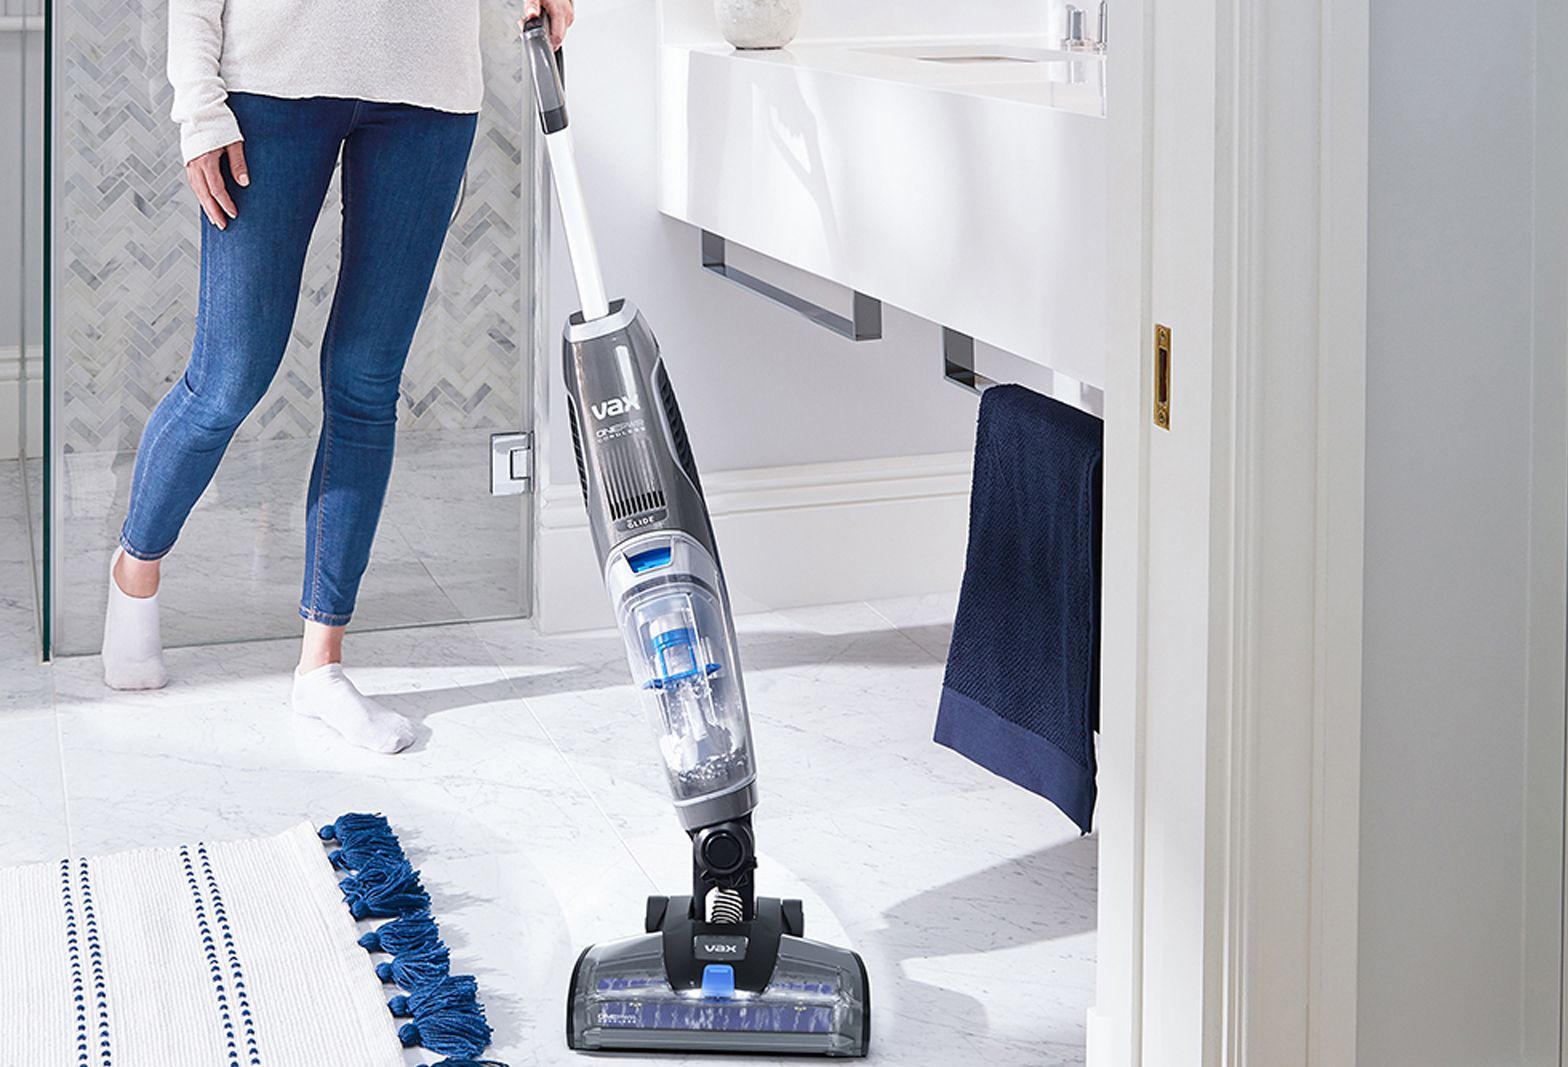 Vax powers up its cordless range led by the new Blade 4 vac and Glide hard floor cleaner image 1